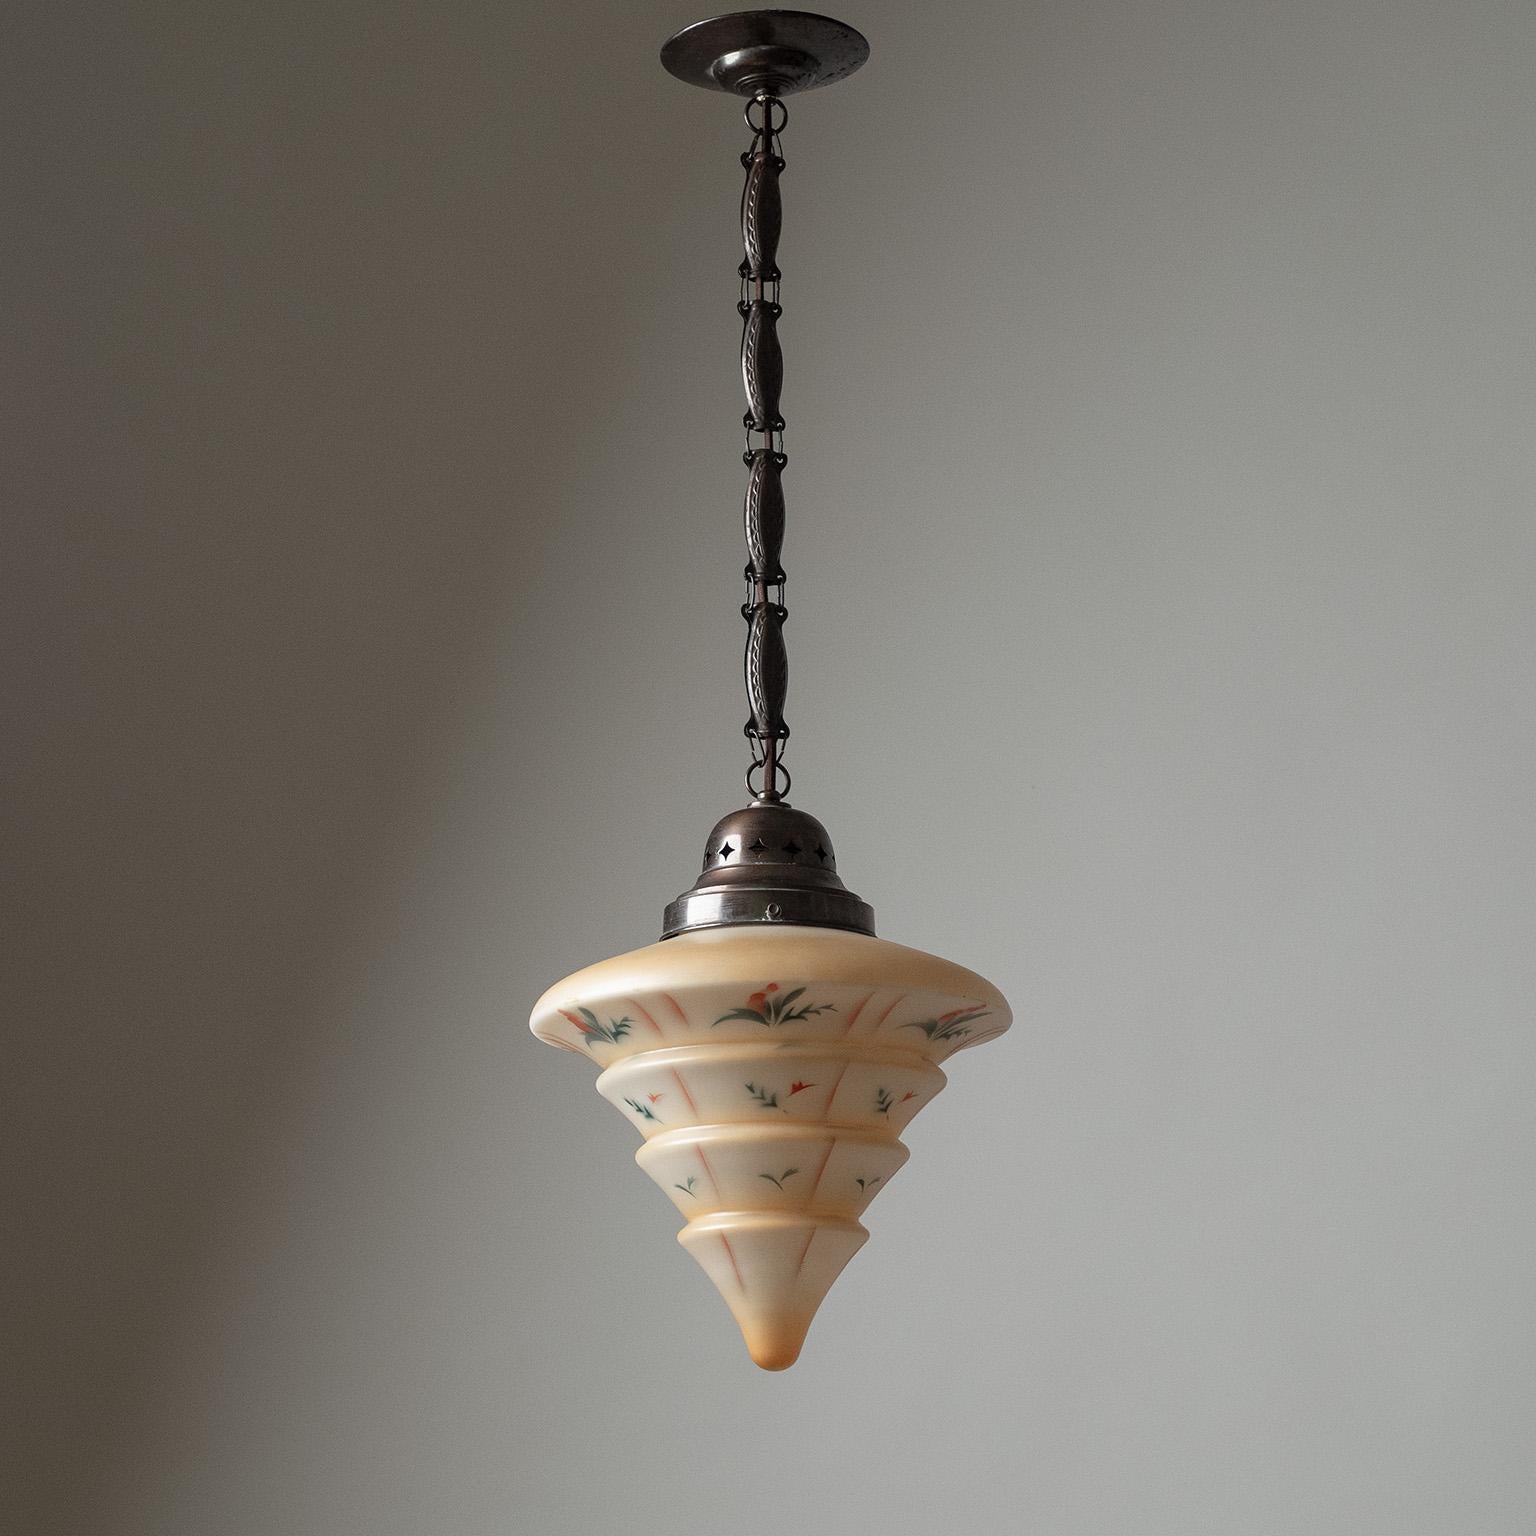 Rare Art Deco pendant in patinated copper with tiered and enameled glass diffuser from the 1920s. Intricately detailed copper hardware that has been patinated to a very dark hue. The satin glass diffuser is enameled in a pale peach color with floral